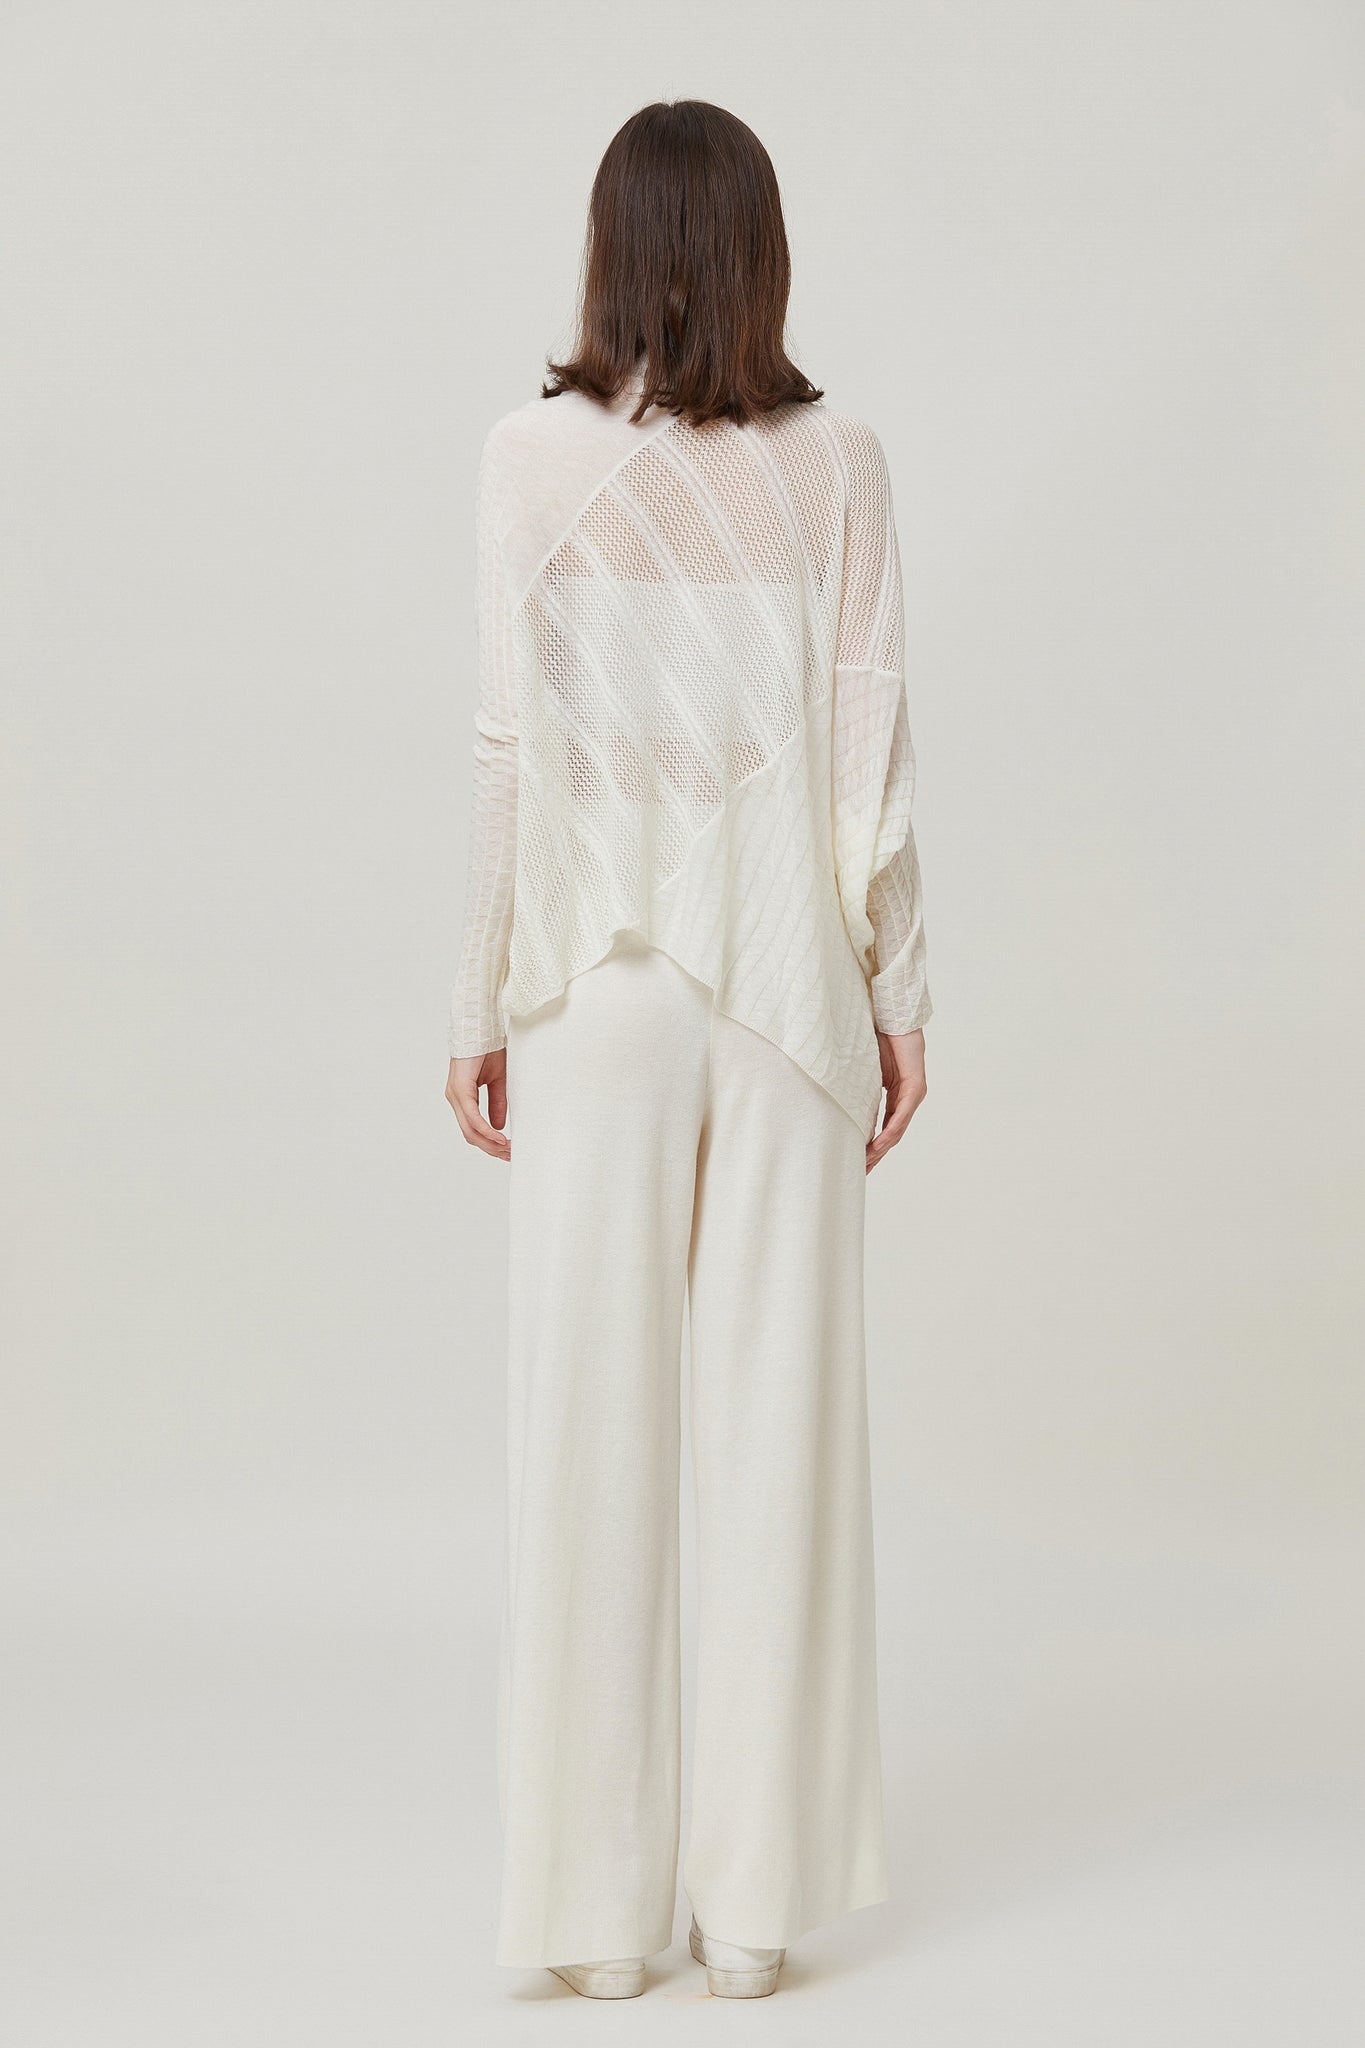 Sylphide | Lille White Semi-Sheer Wool Top